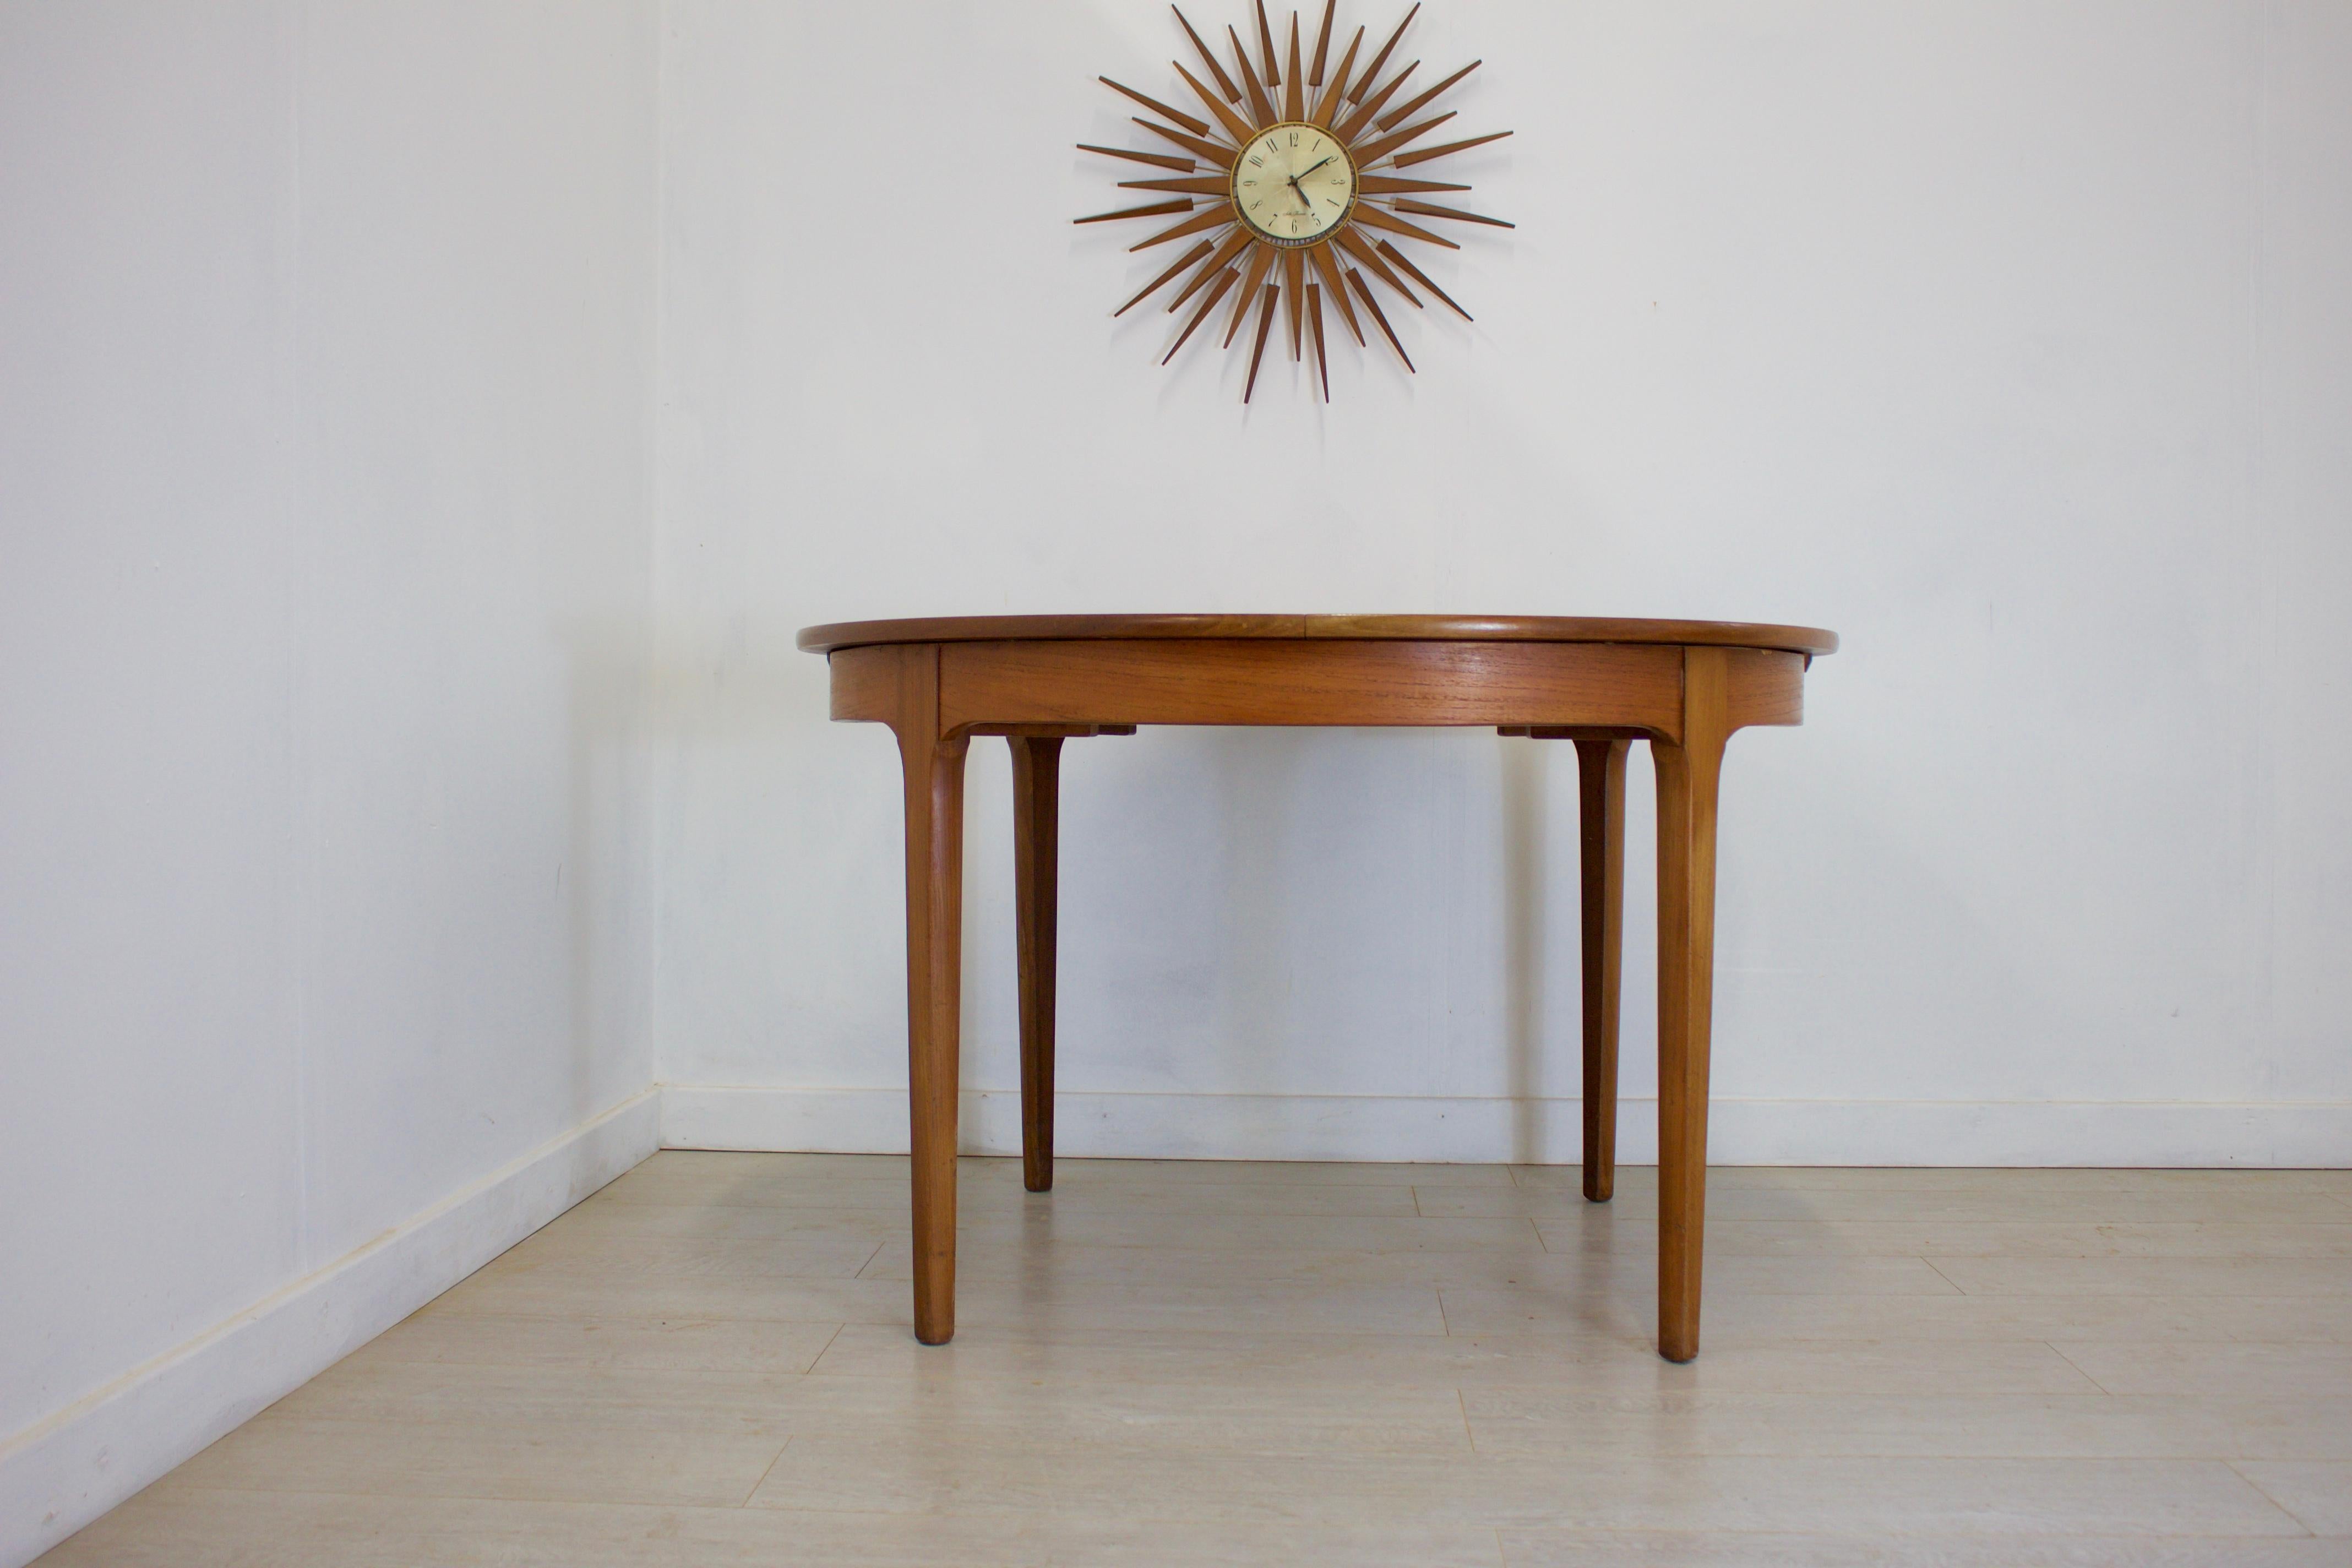 - Mid-Century Modern extending dining table
- Made in the UK by Nathan
- Made from teak and teak veneer
- Featuring 1 extending leaf
- Extended width 167 cm.